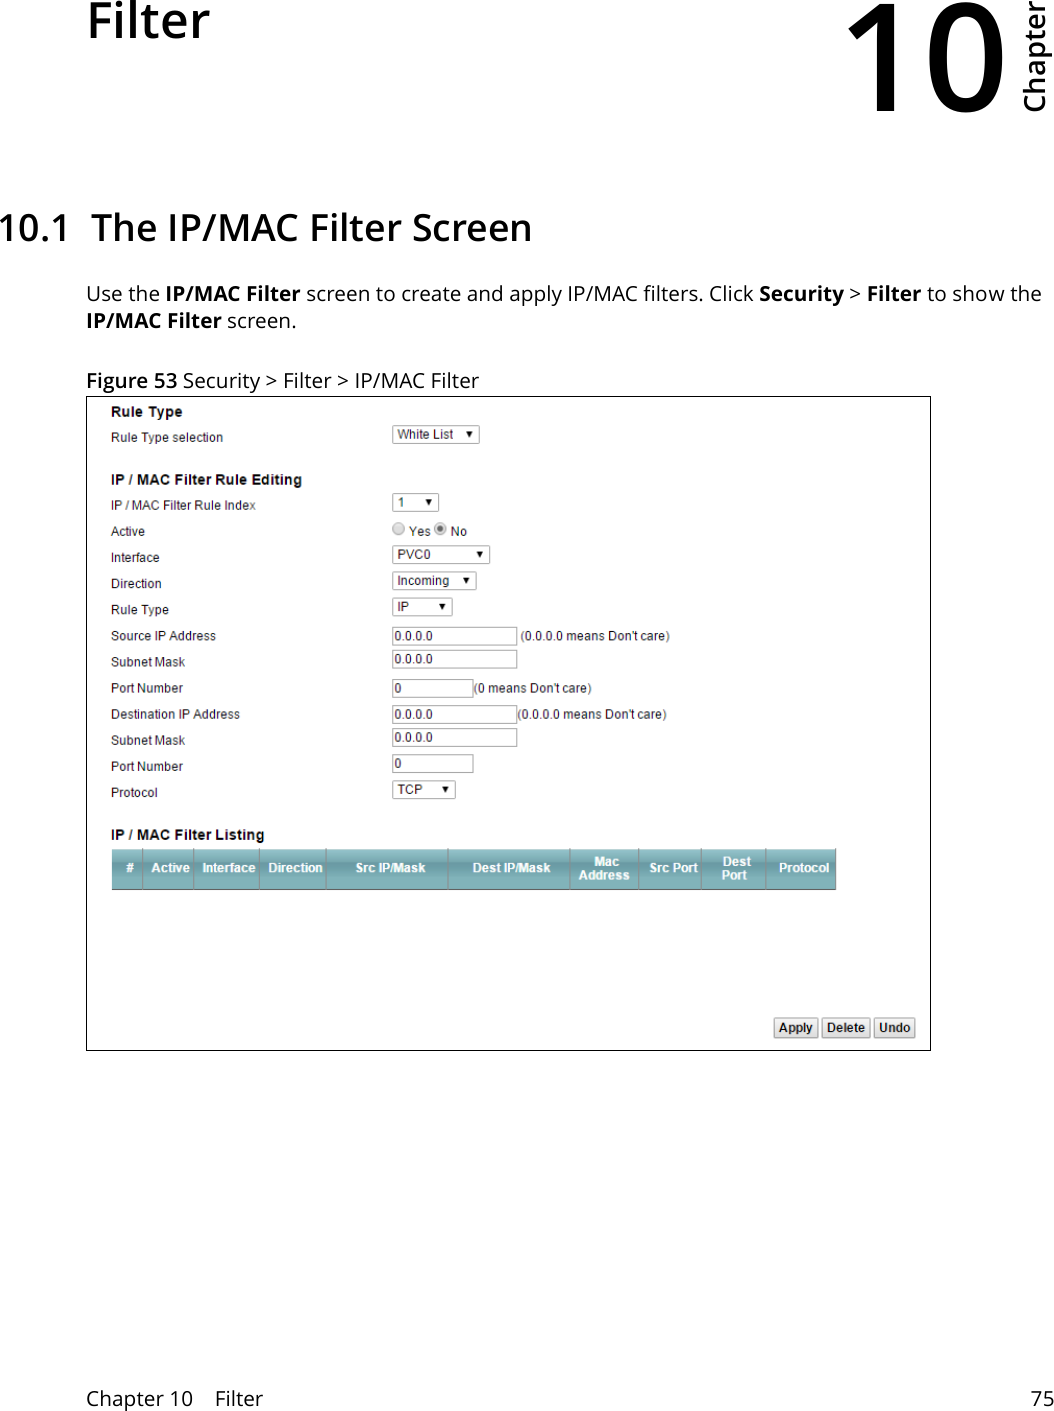 10Chapter Chapter 10    Filter 75CHAPTER 10 Chapter 10 Filter10.1  The IP/MAC Filter ScreenUse the IP/MAC Filter screen to create and apply IP/MAC filters. Click Security &gt; Filter to show the IP/MAC Filter screen.Figure 53 Security &gt; Filter &gt; IP/MAC Filter 